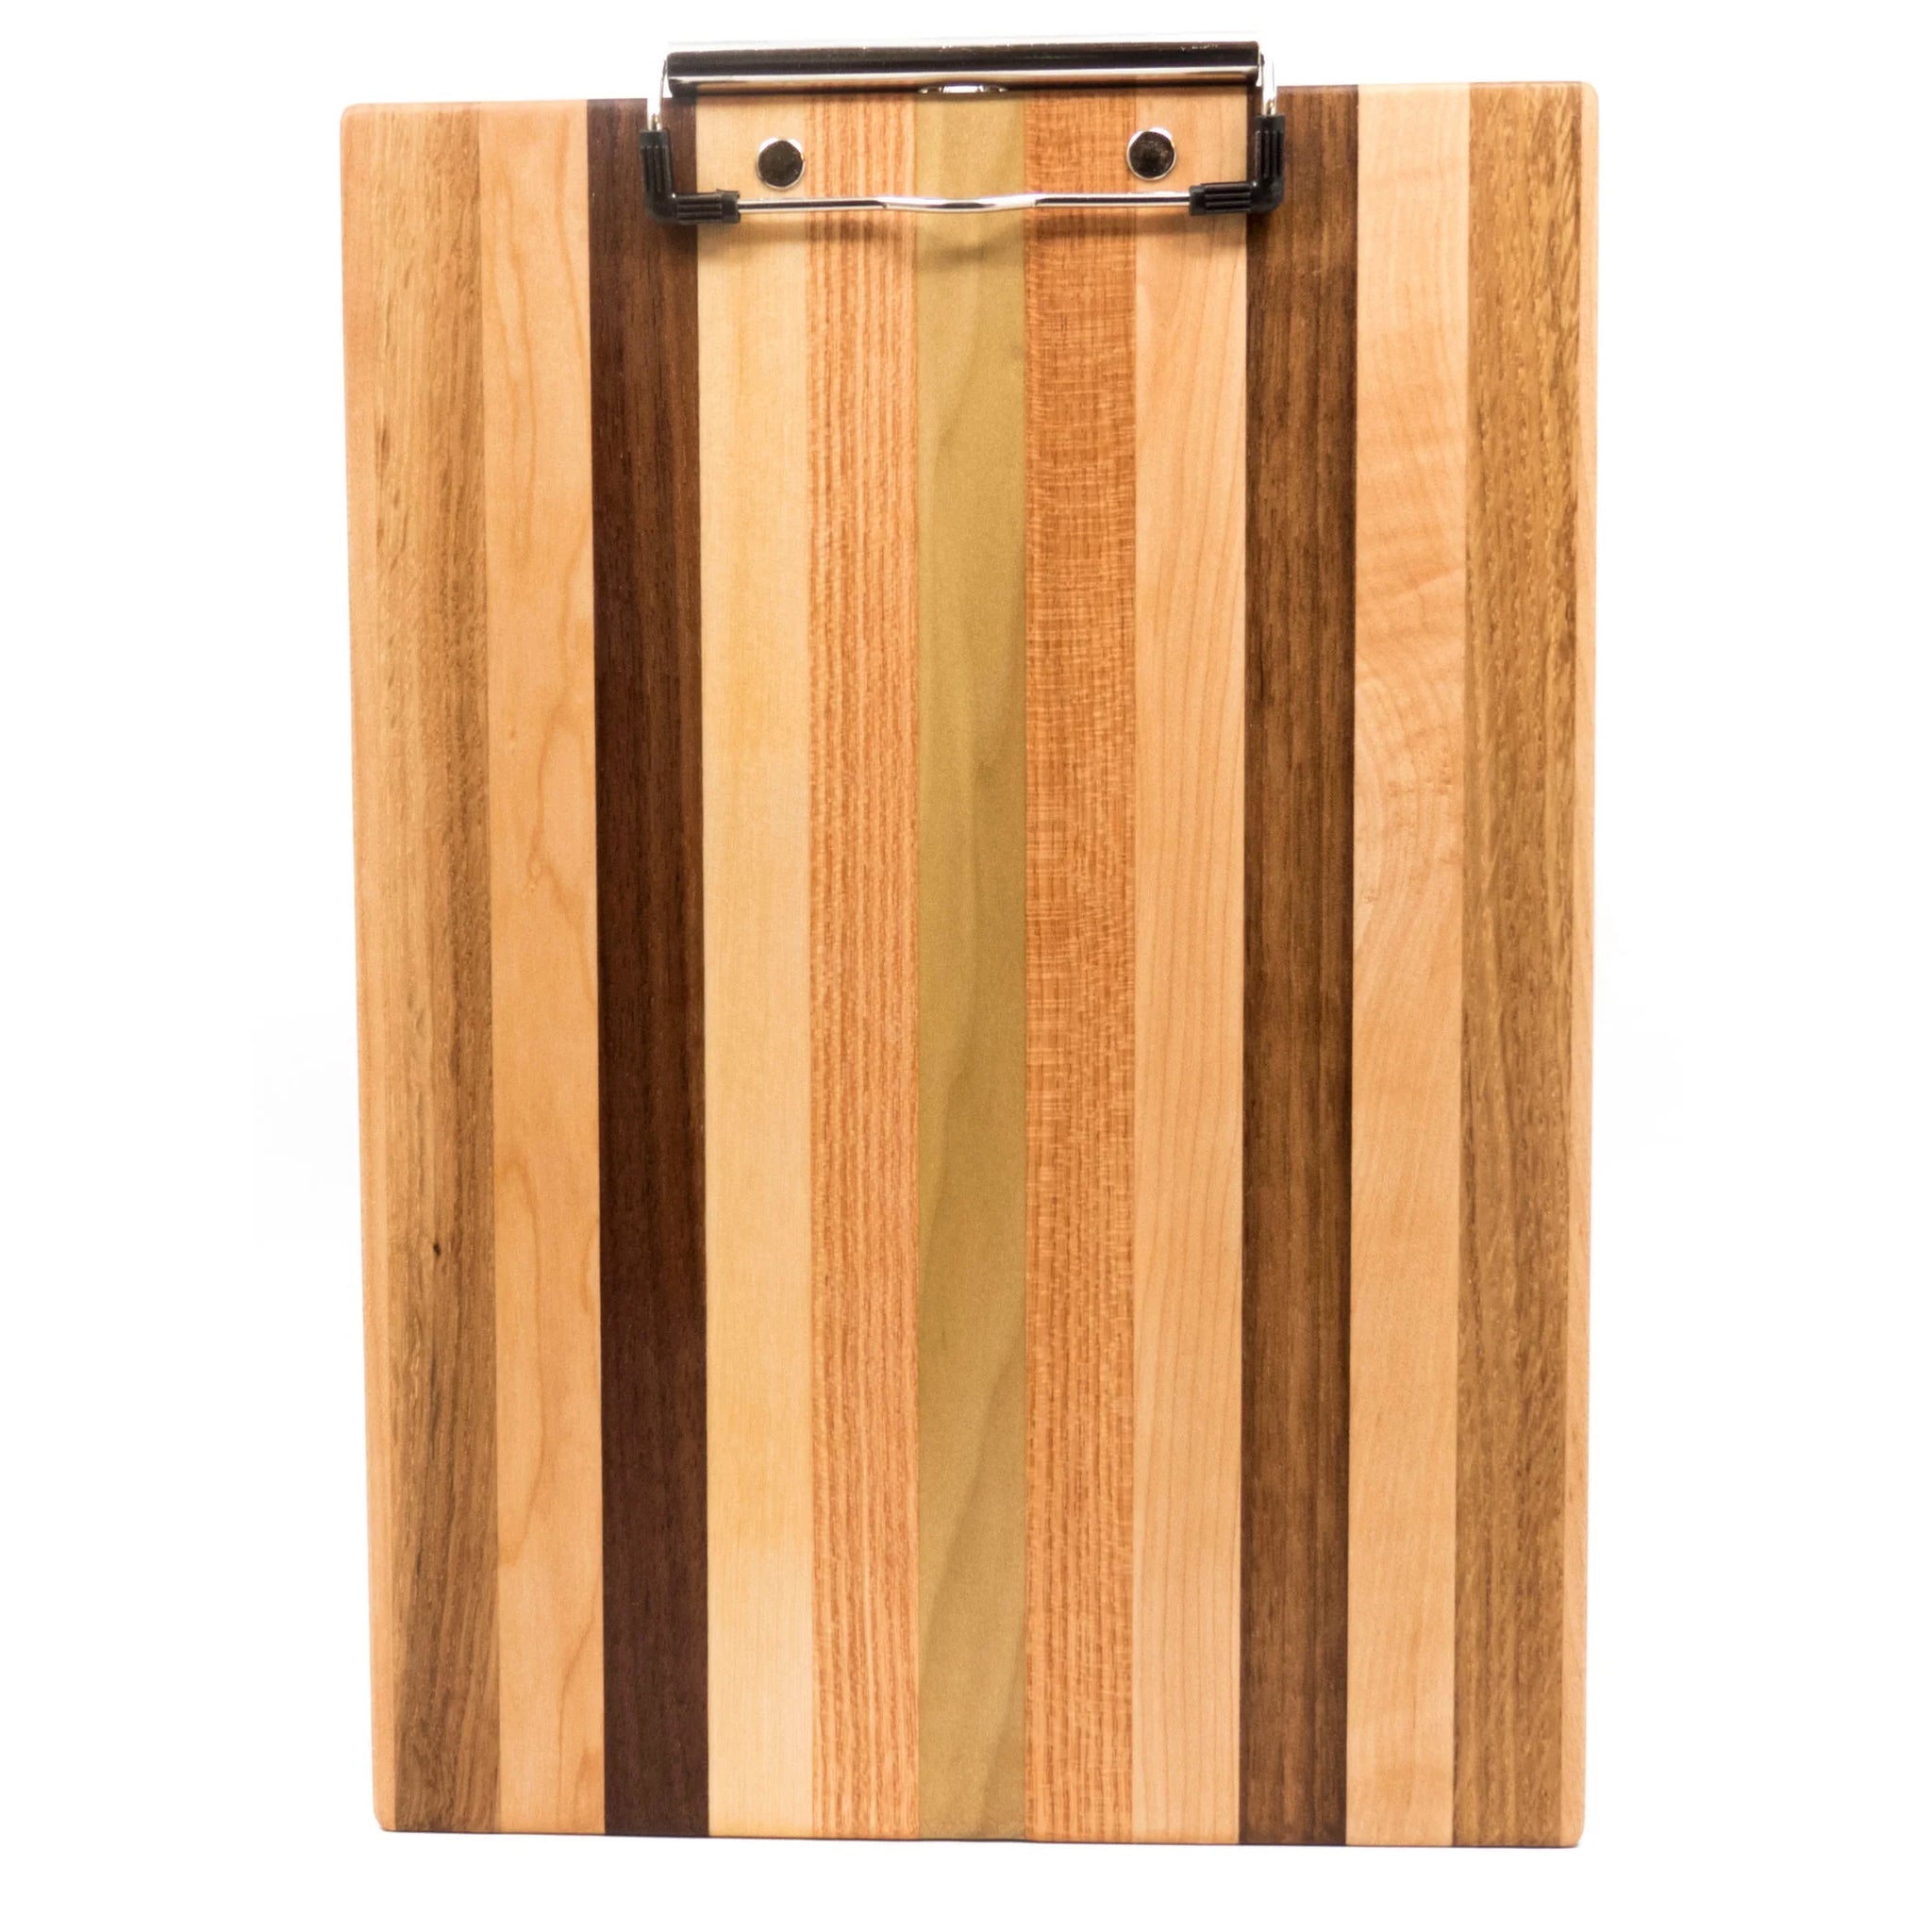 Wood Clipboard – With These Hands Gallery